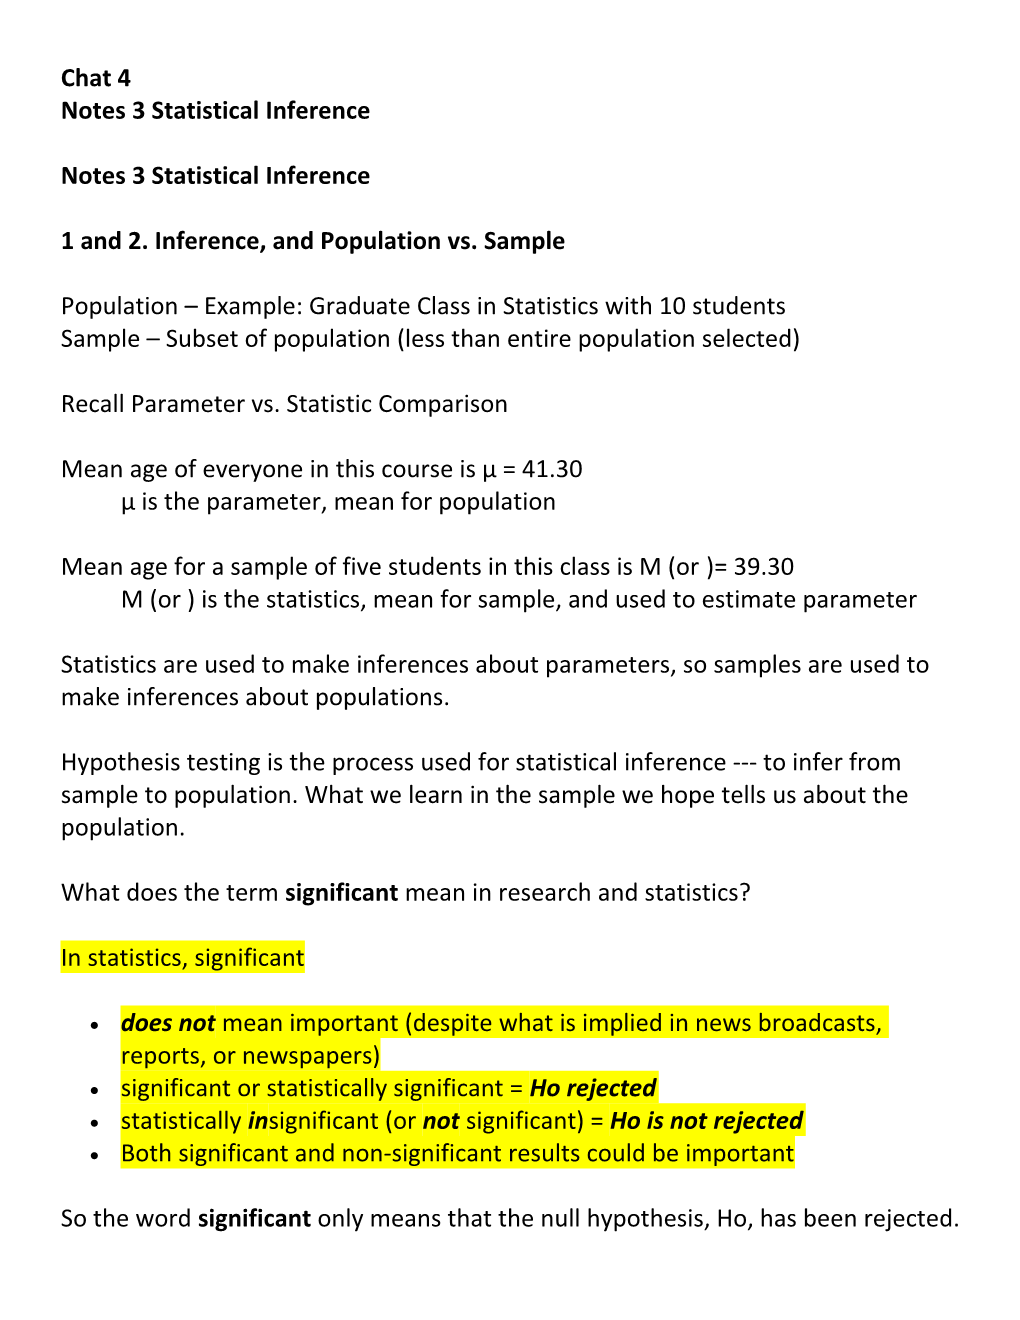 1 and 2.Inference, and Population Vs. Sample